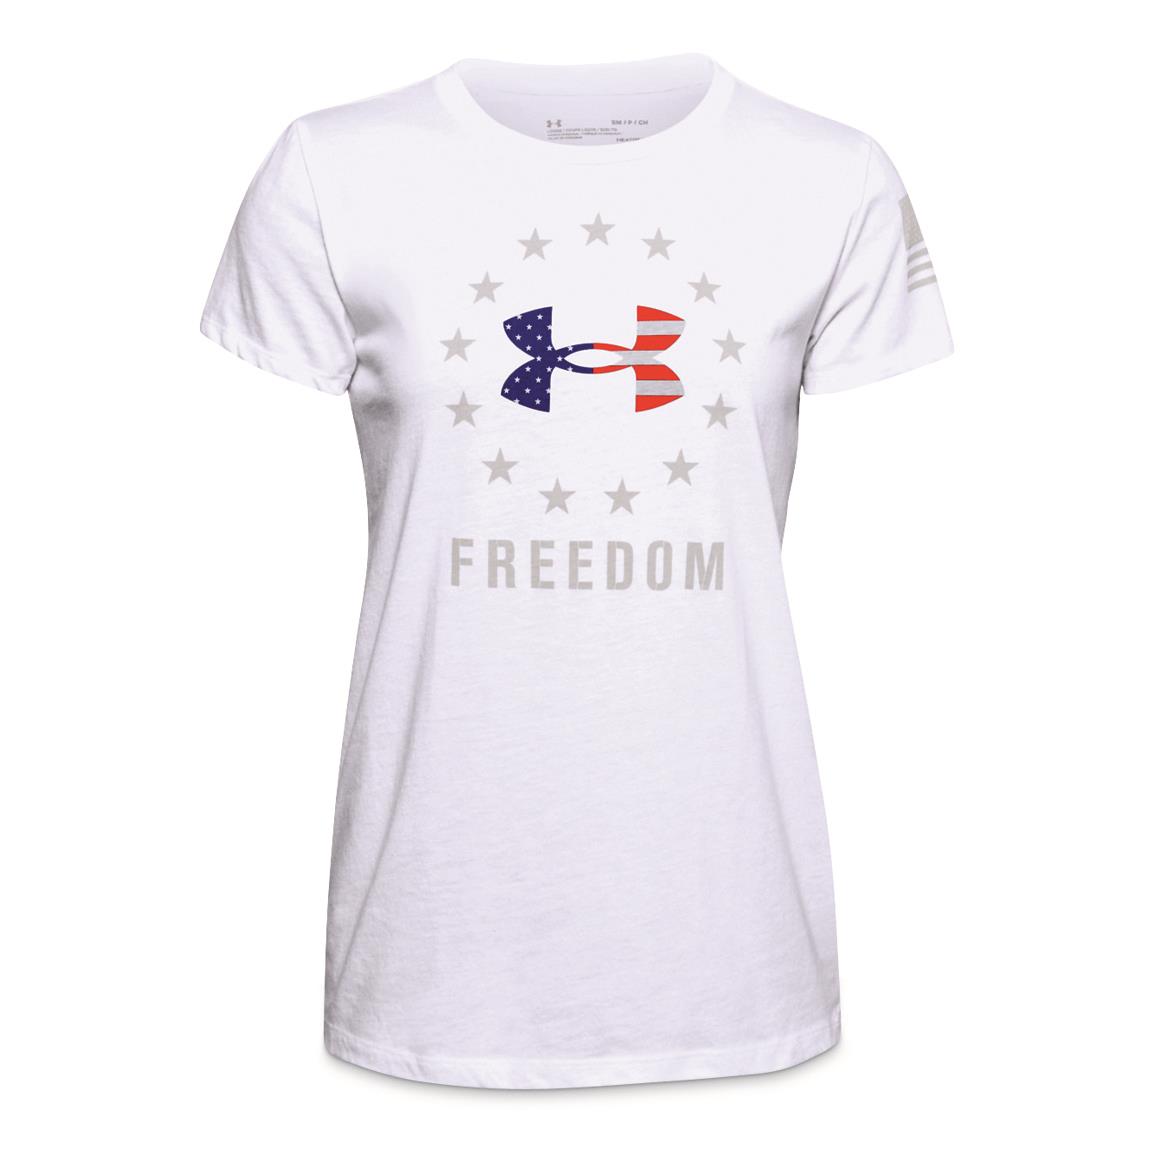 Under Armour Women's Freedom Chest Shirt, White/halo Gray